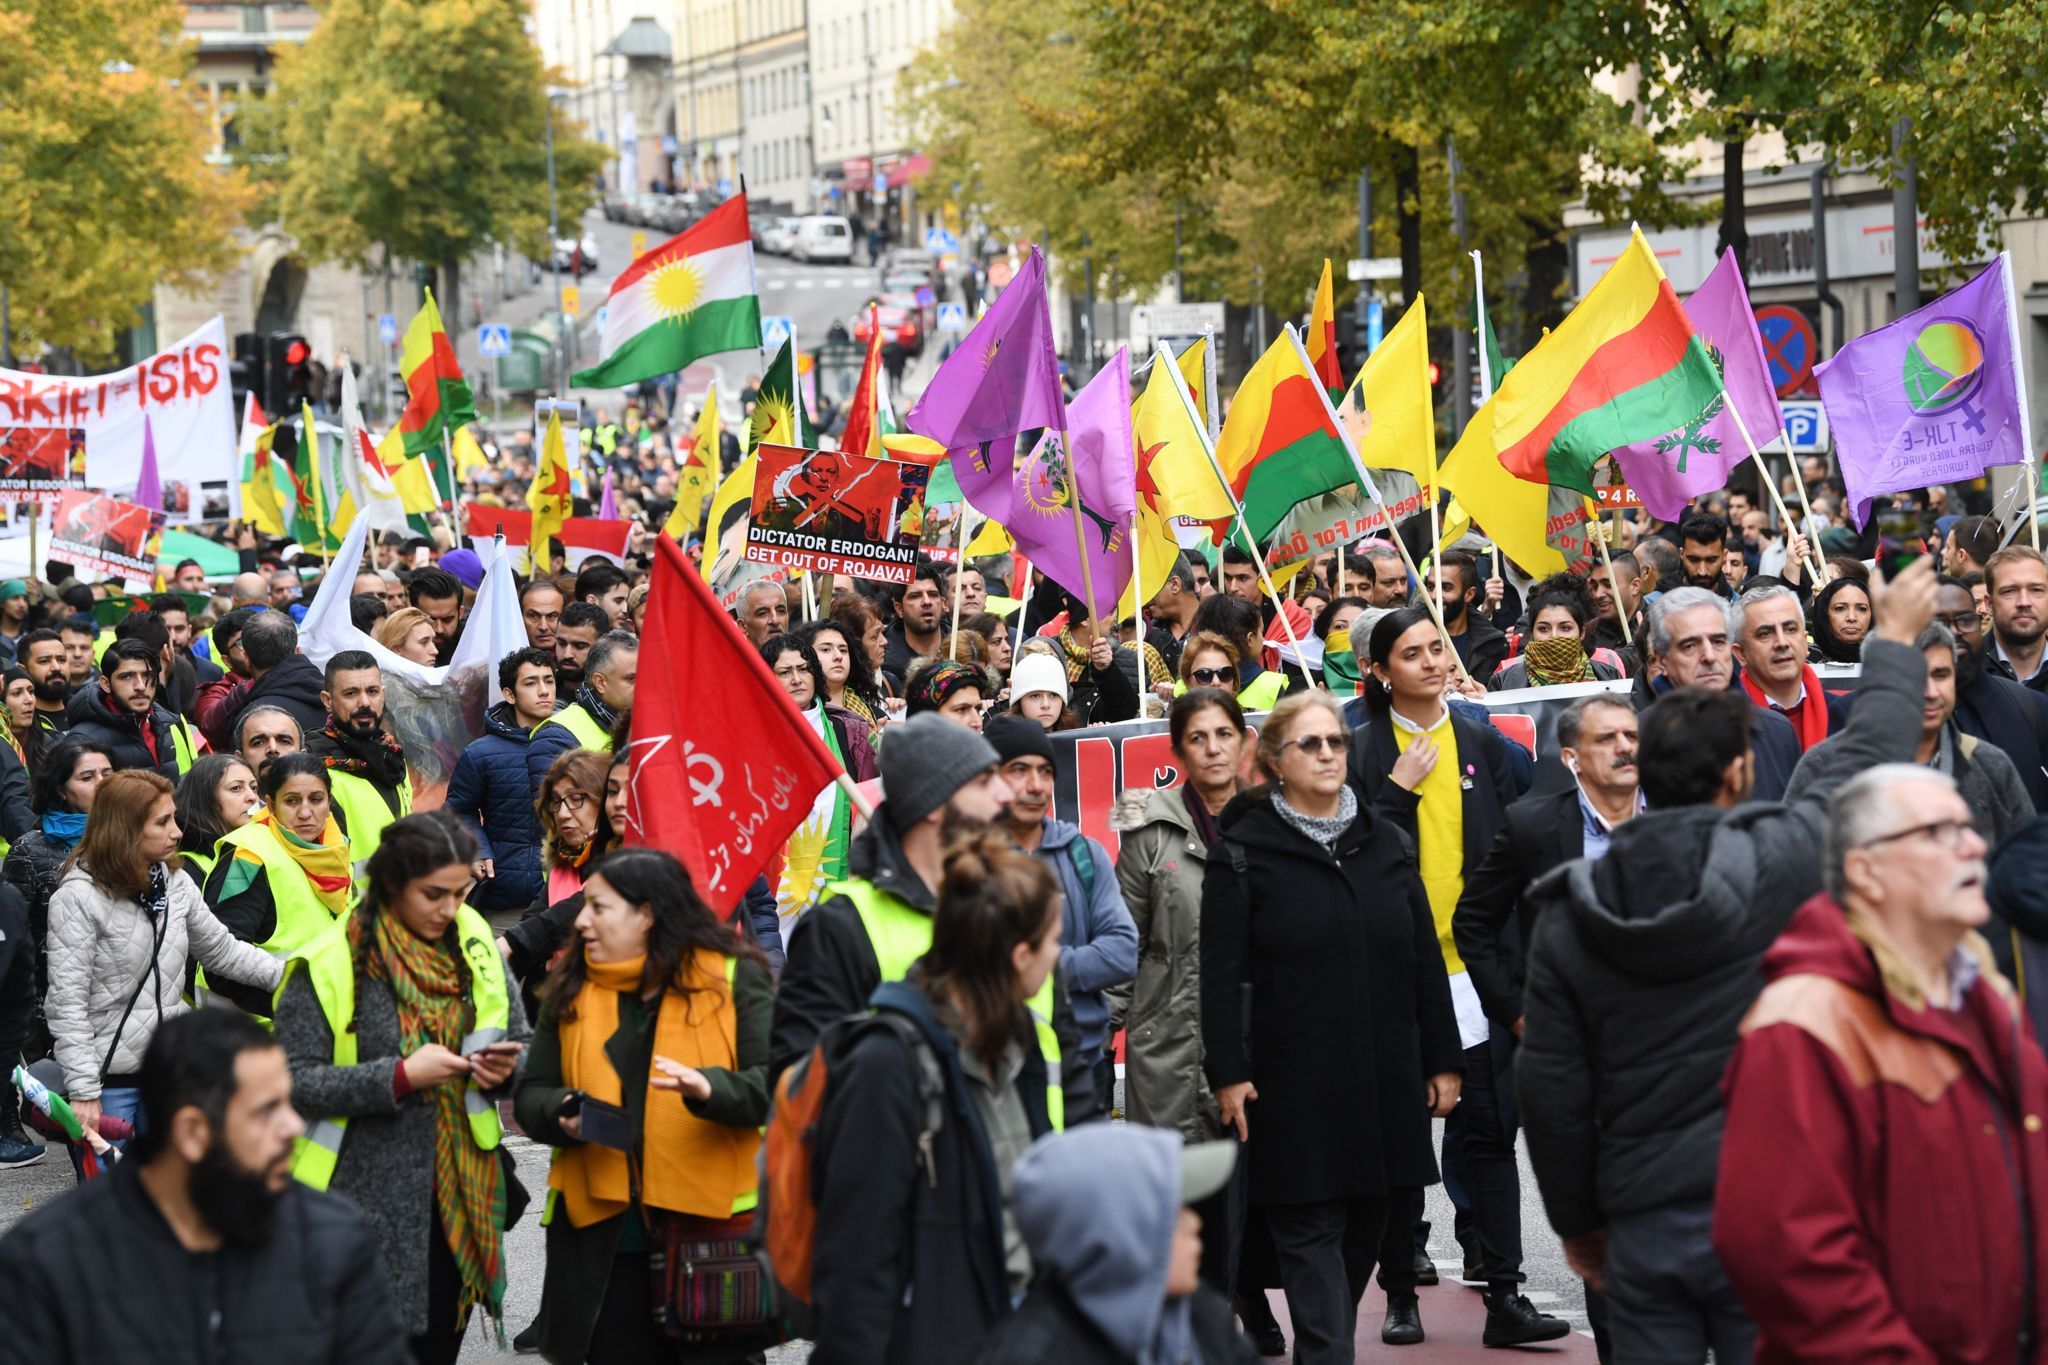 Kurdish protesters take part in a demonstration holding Kurdish flags in Stockholm, Sweden, on October 12, 2019, to support Kurdish militants as Turkey keeps up its assault on Kurdish-held border towns in northeastern Syria